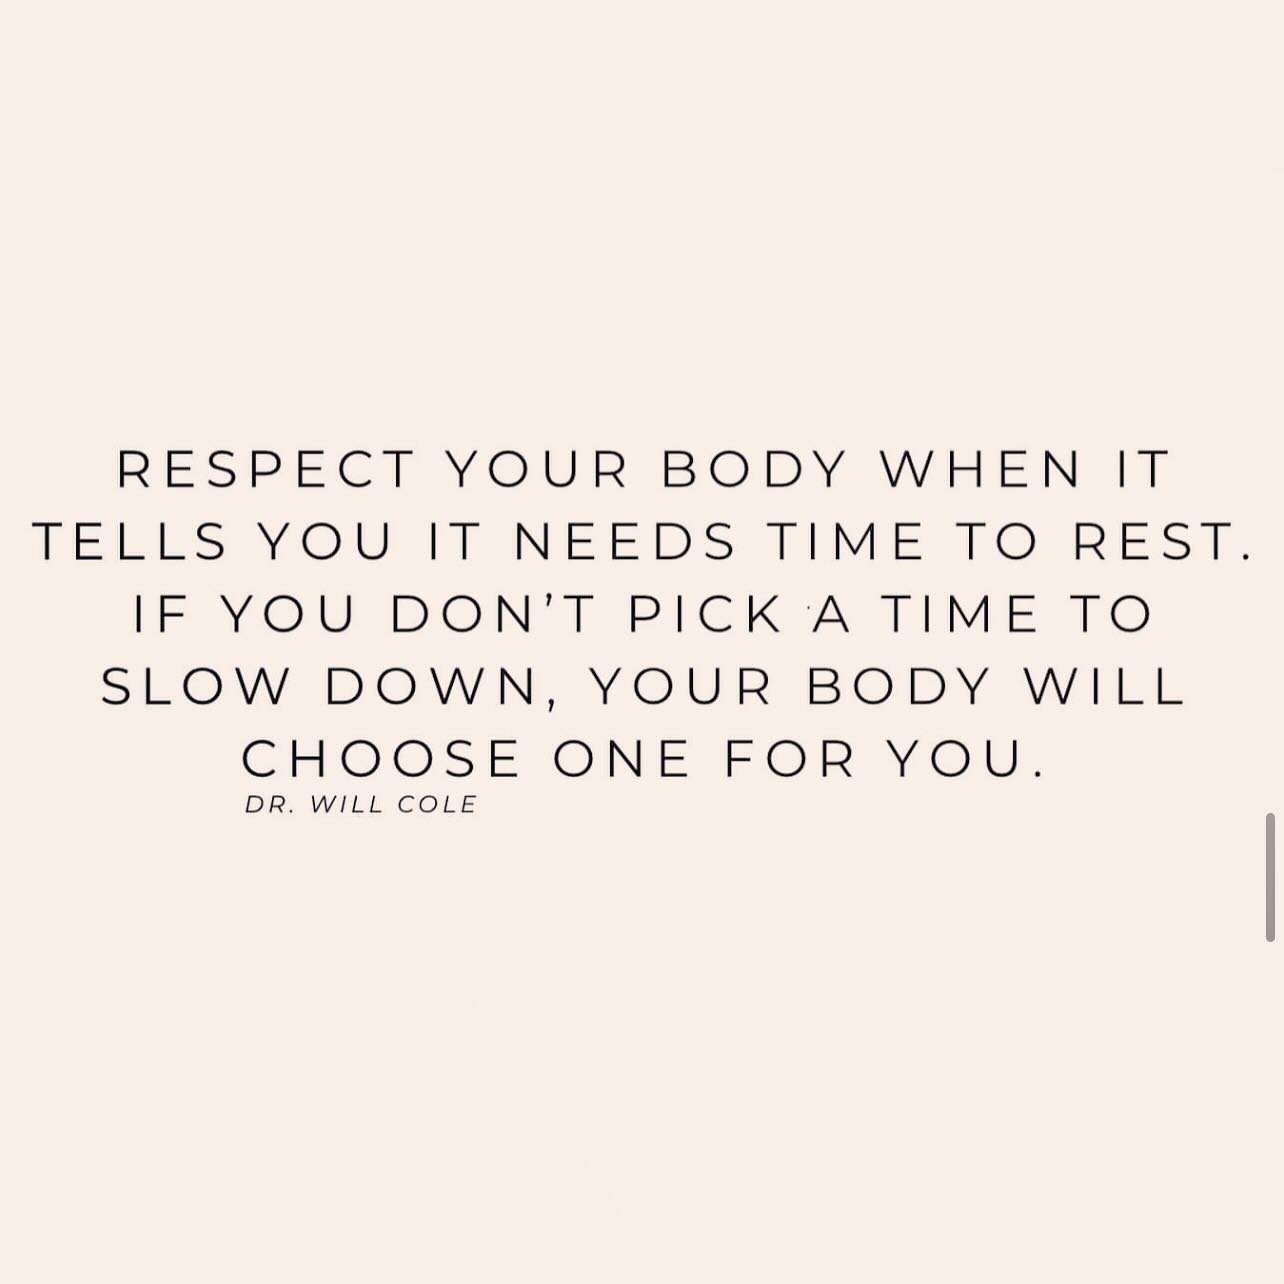 When was the last time you slowed down to listen? 
What&rsquo;s your body telling you today? 
Nourish your spirit. Honour your body. Rest your mind. 
Taking care of yourself often means doing less not more. 

What&rsquo;s one way you&rsquo;ll respect